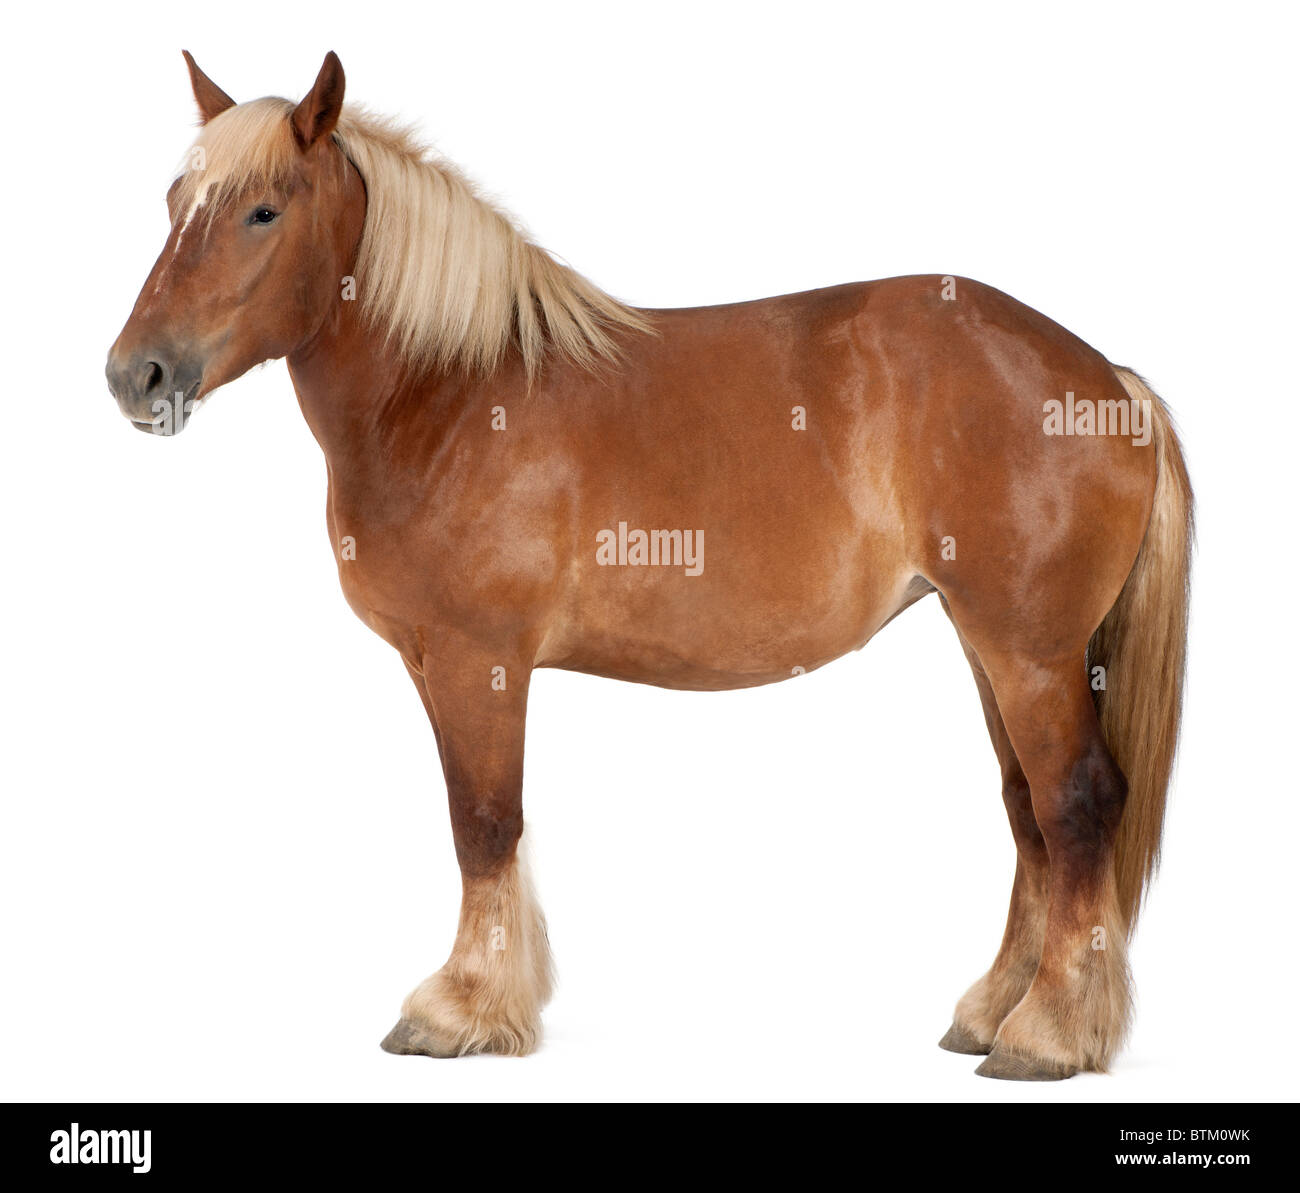 Belgian horse, Belgian Heavy Horse, Brabancon, a draft horse breed, 4 years old, standing in front of white background Stock Photo